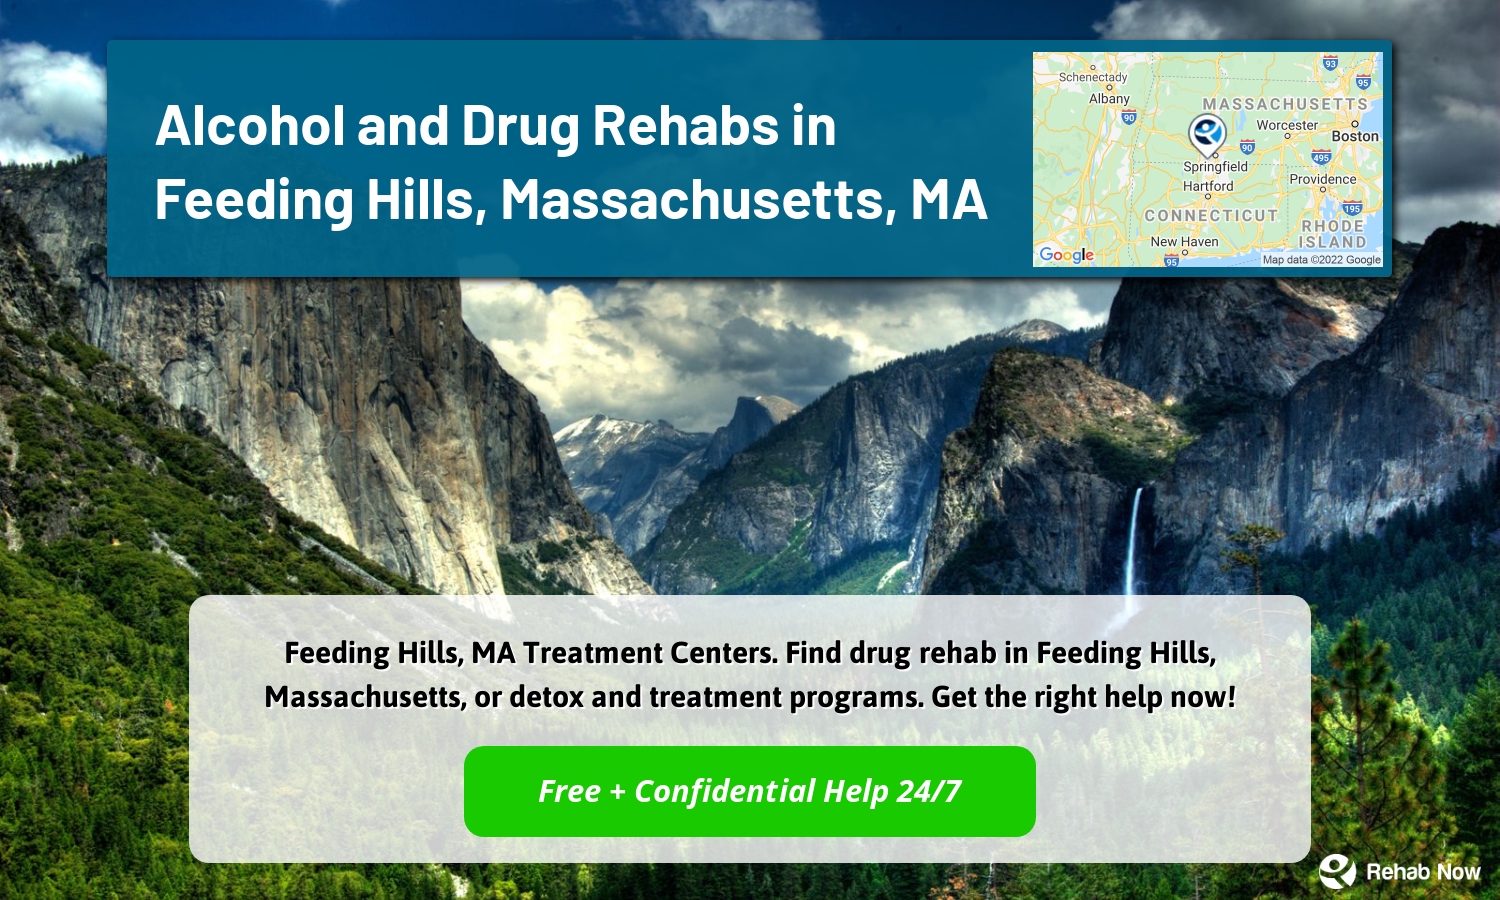 Feeding Hills, MA Treatment Centers. Find drug rehab in Feeding Hills, Massachusetts, or detox and treatment programs. Get the right help now!